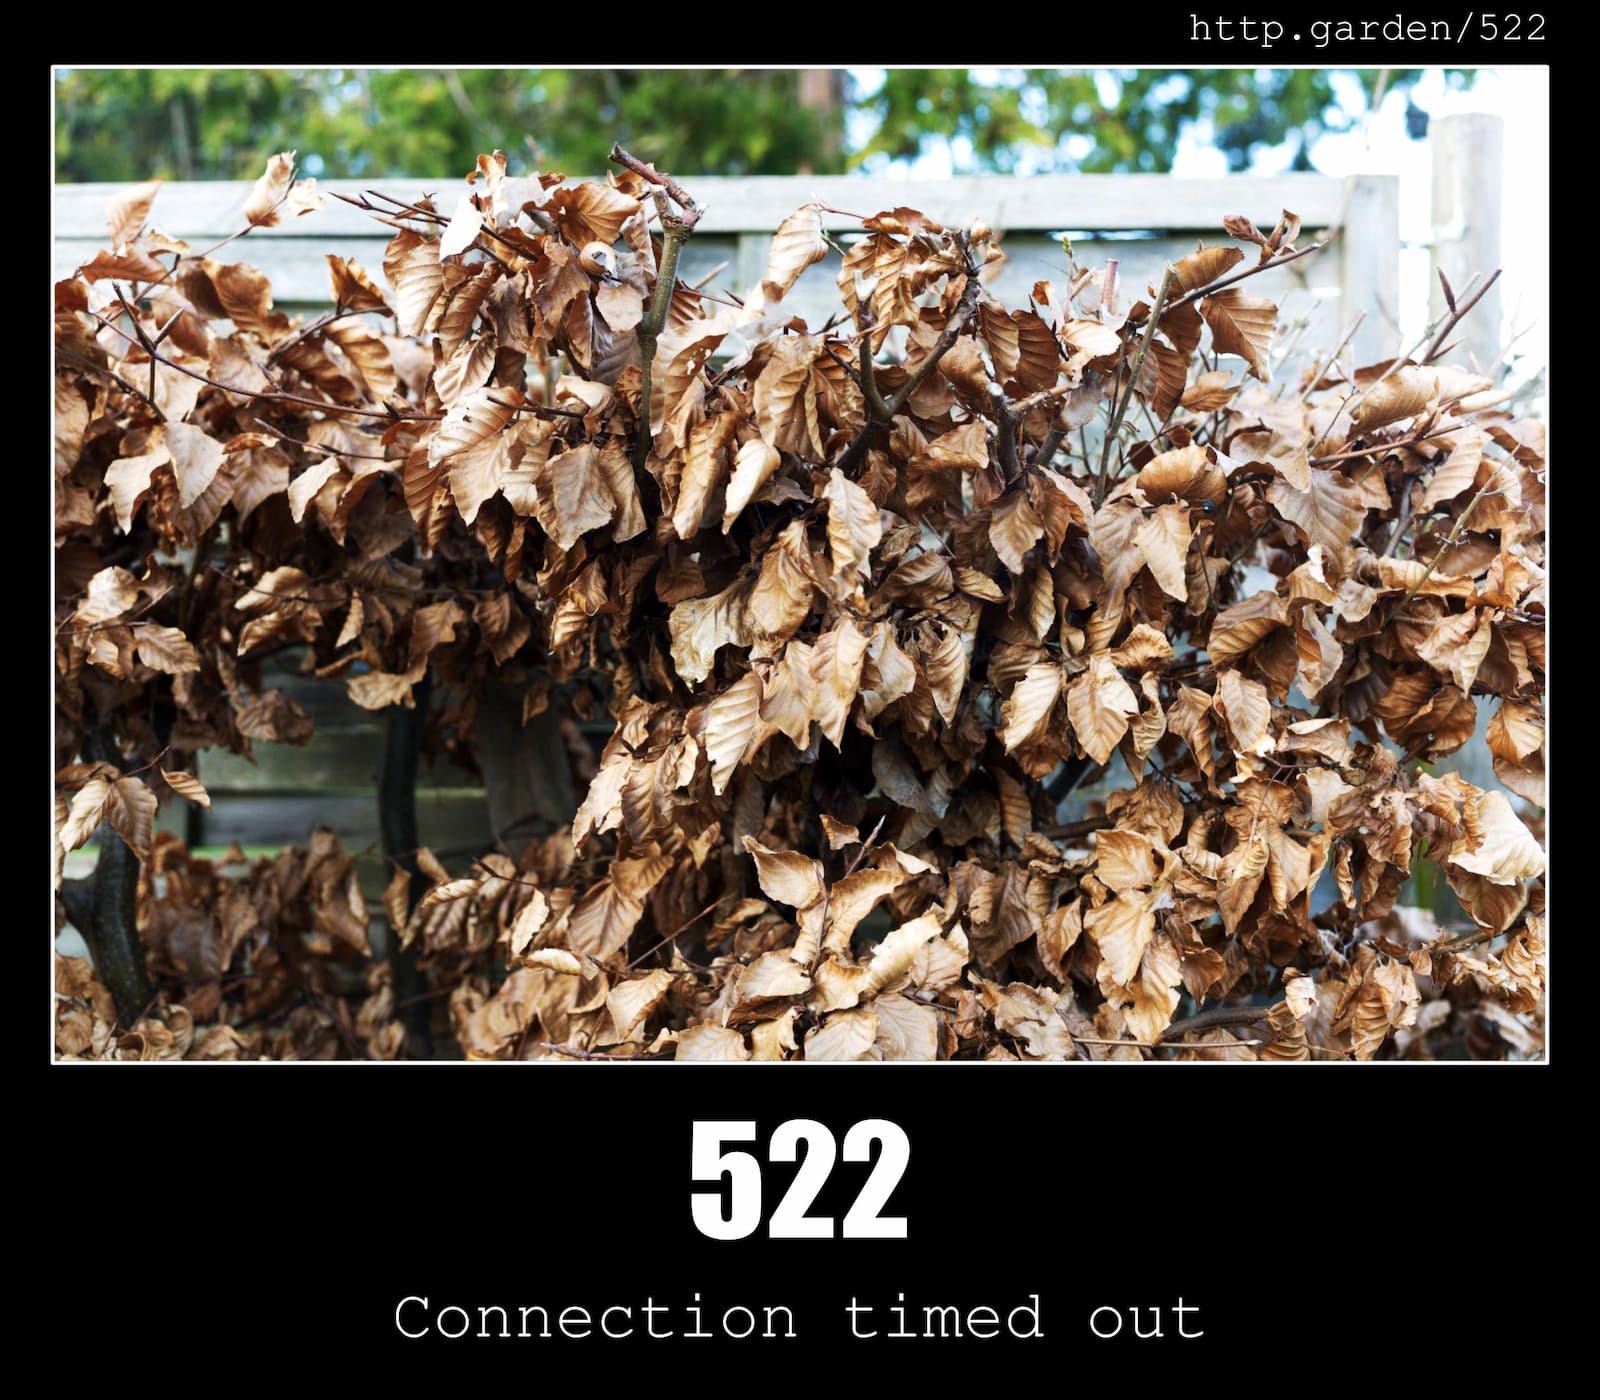 HTTP Status Code 522 Connection timed out & Gardening